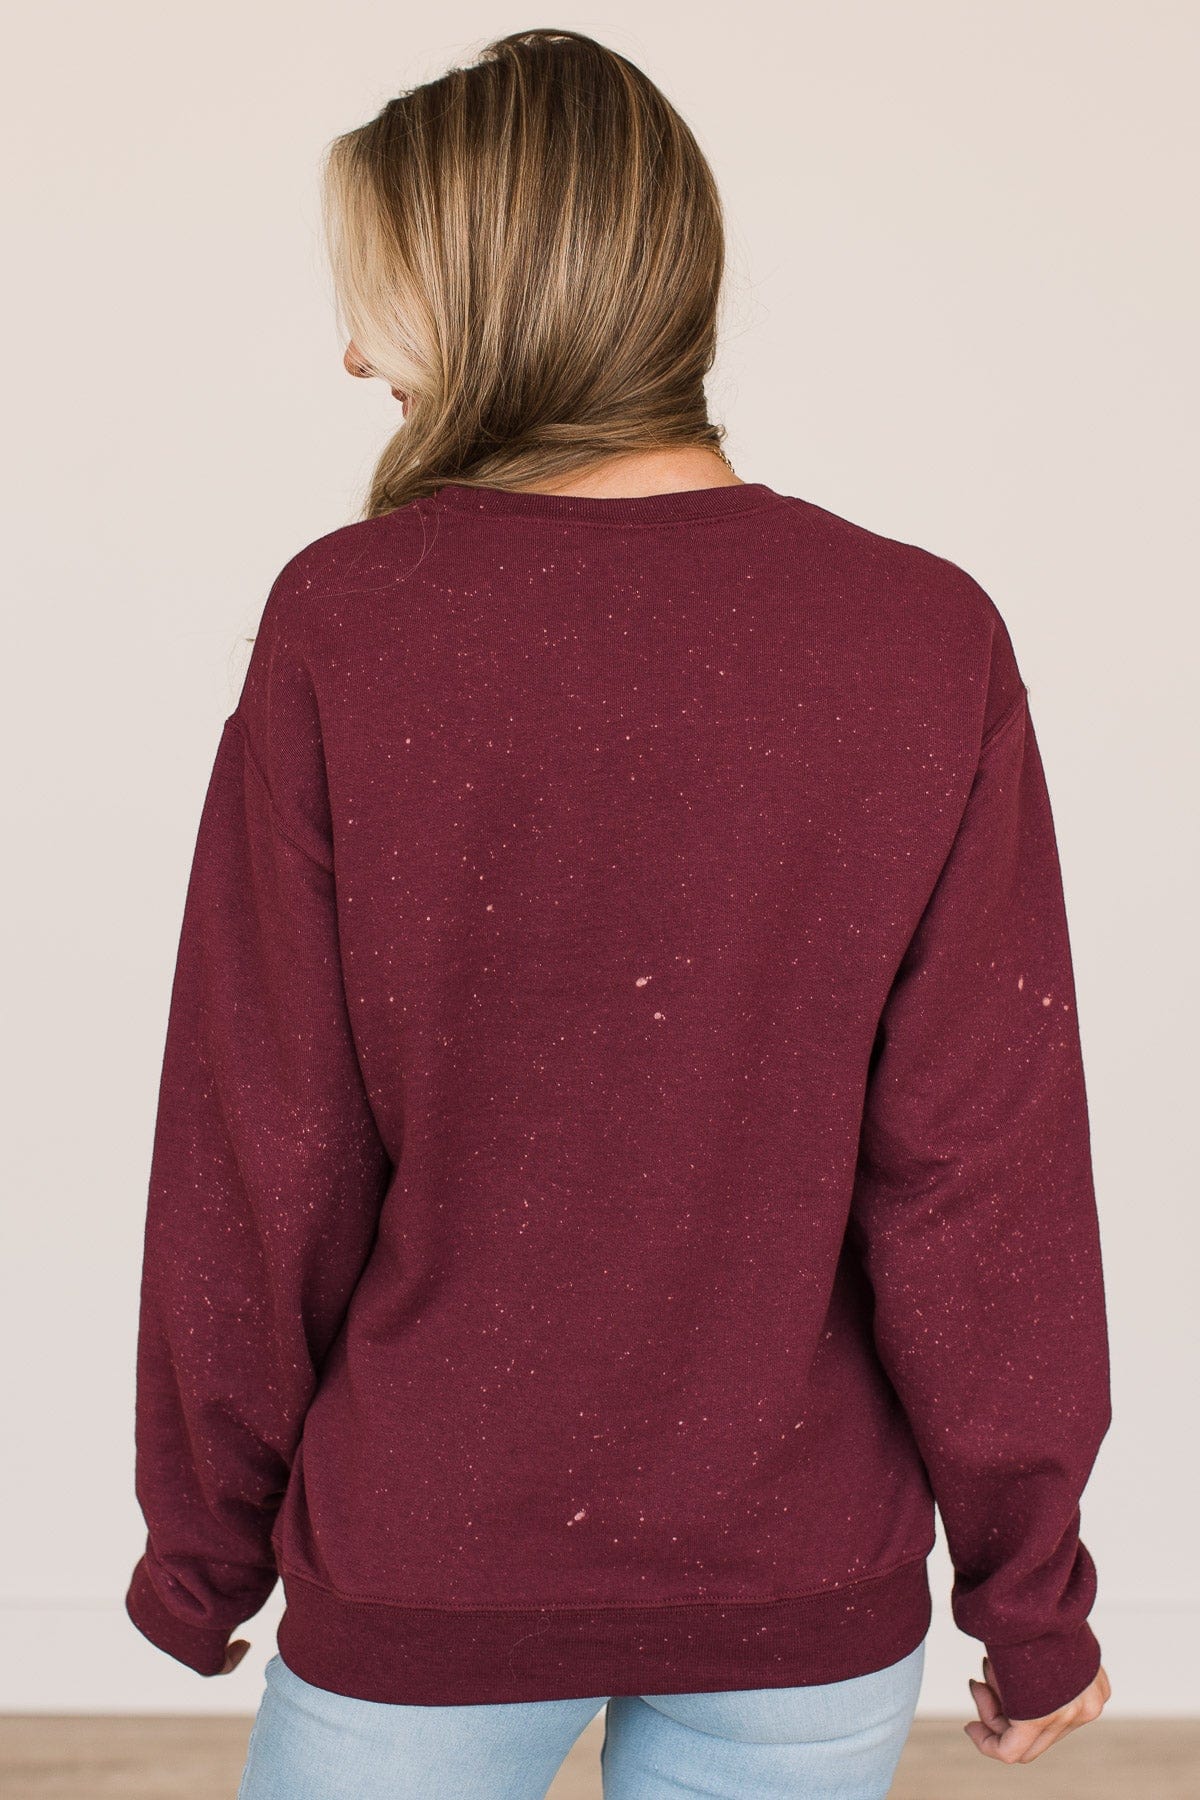 "Sweater Weather" Bleached Crew Neck- Burgundy